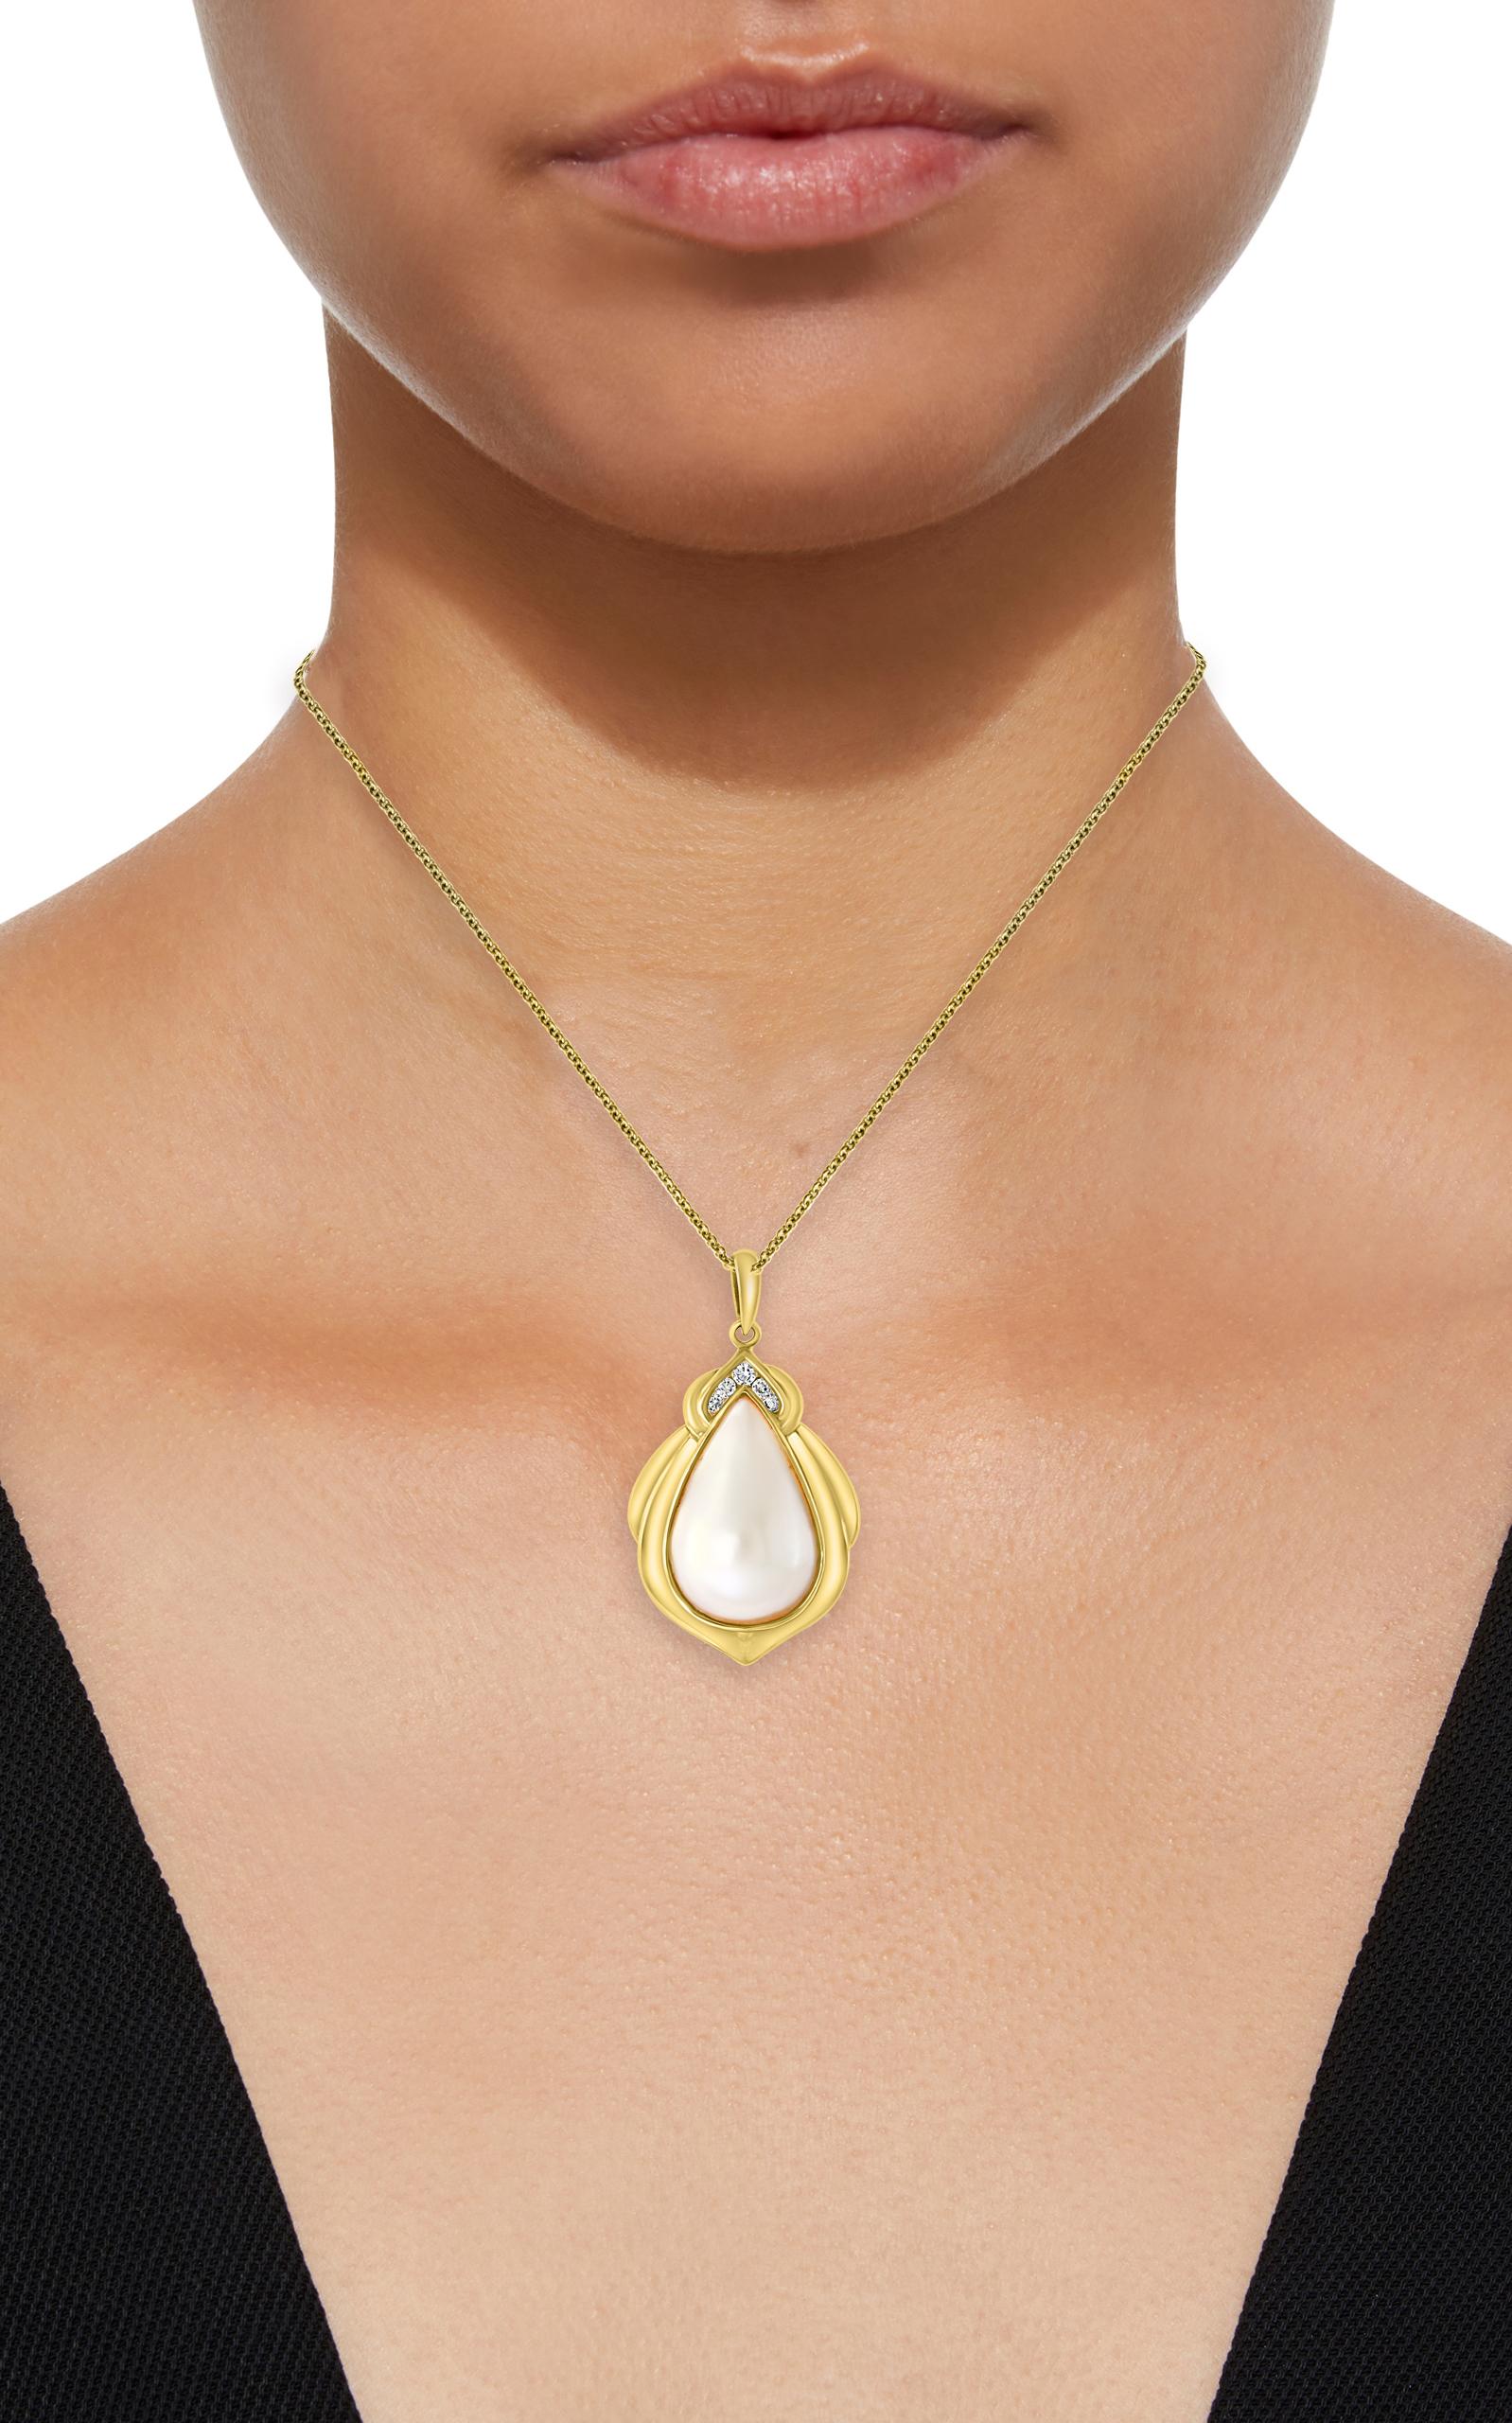 Pear Cut Pear Mabe Pearl and Diamond Pendant / Necklace 14 Karat Yellow Gold with Chain